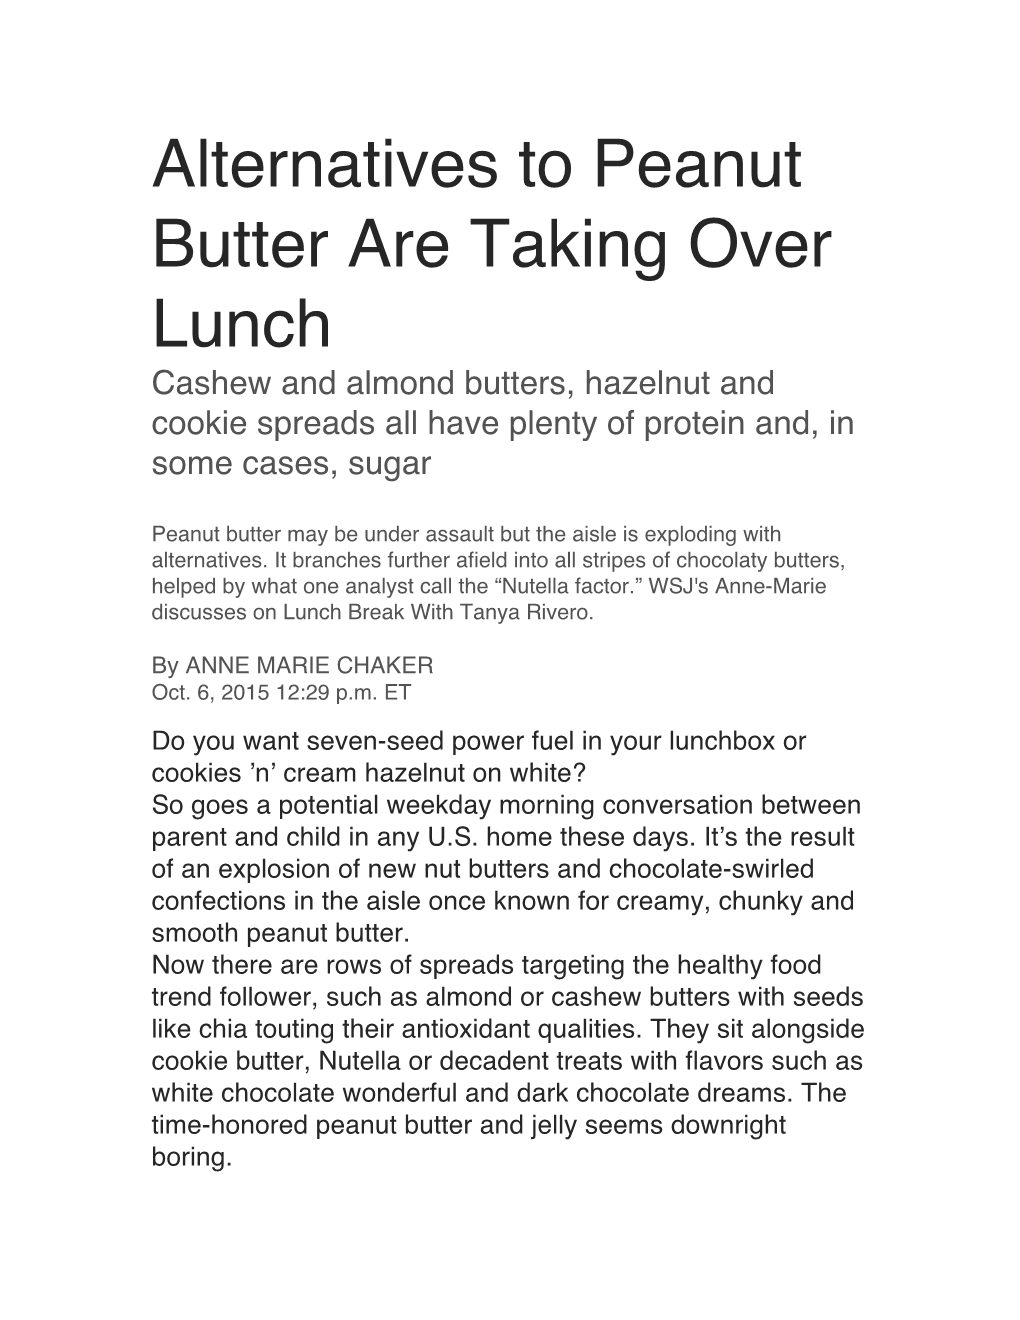 Alternatives to Peanut Butter Are Taking Over Lunch Cashew and Almond Butters, Hazelnut and Cookie Spreads All Have Plenty of Protein And, in Some Cases, Sugar